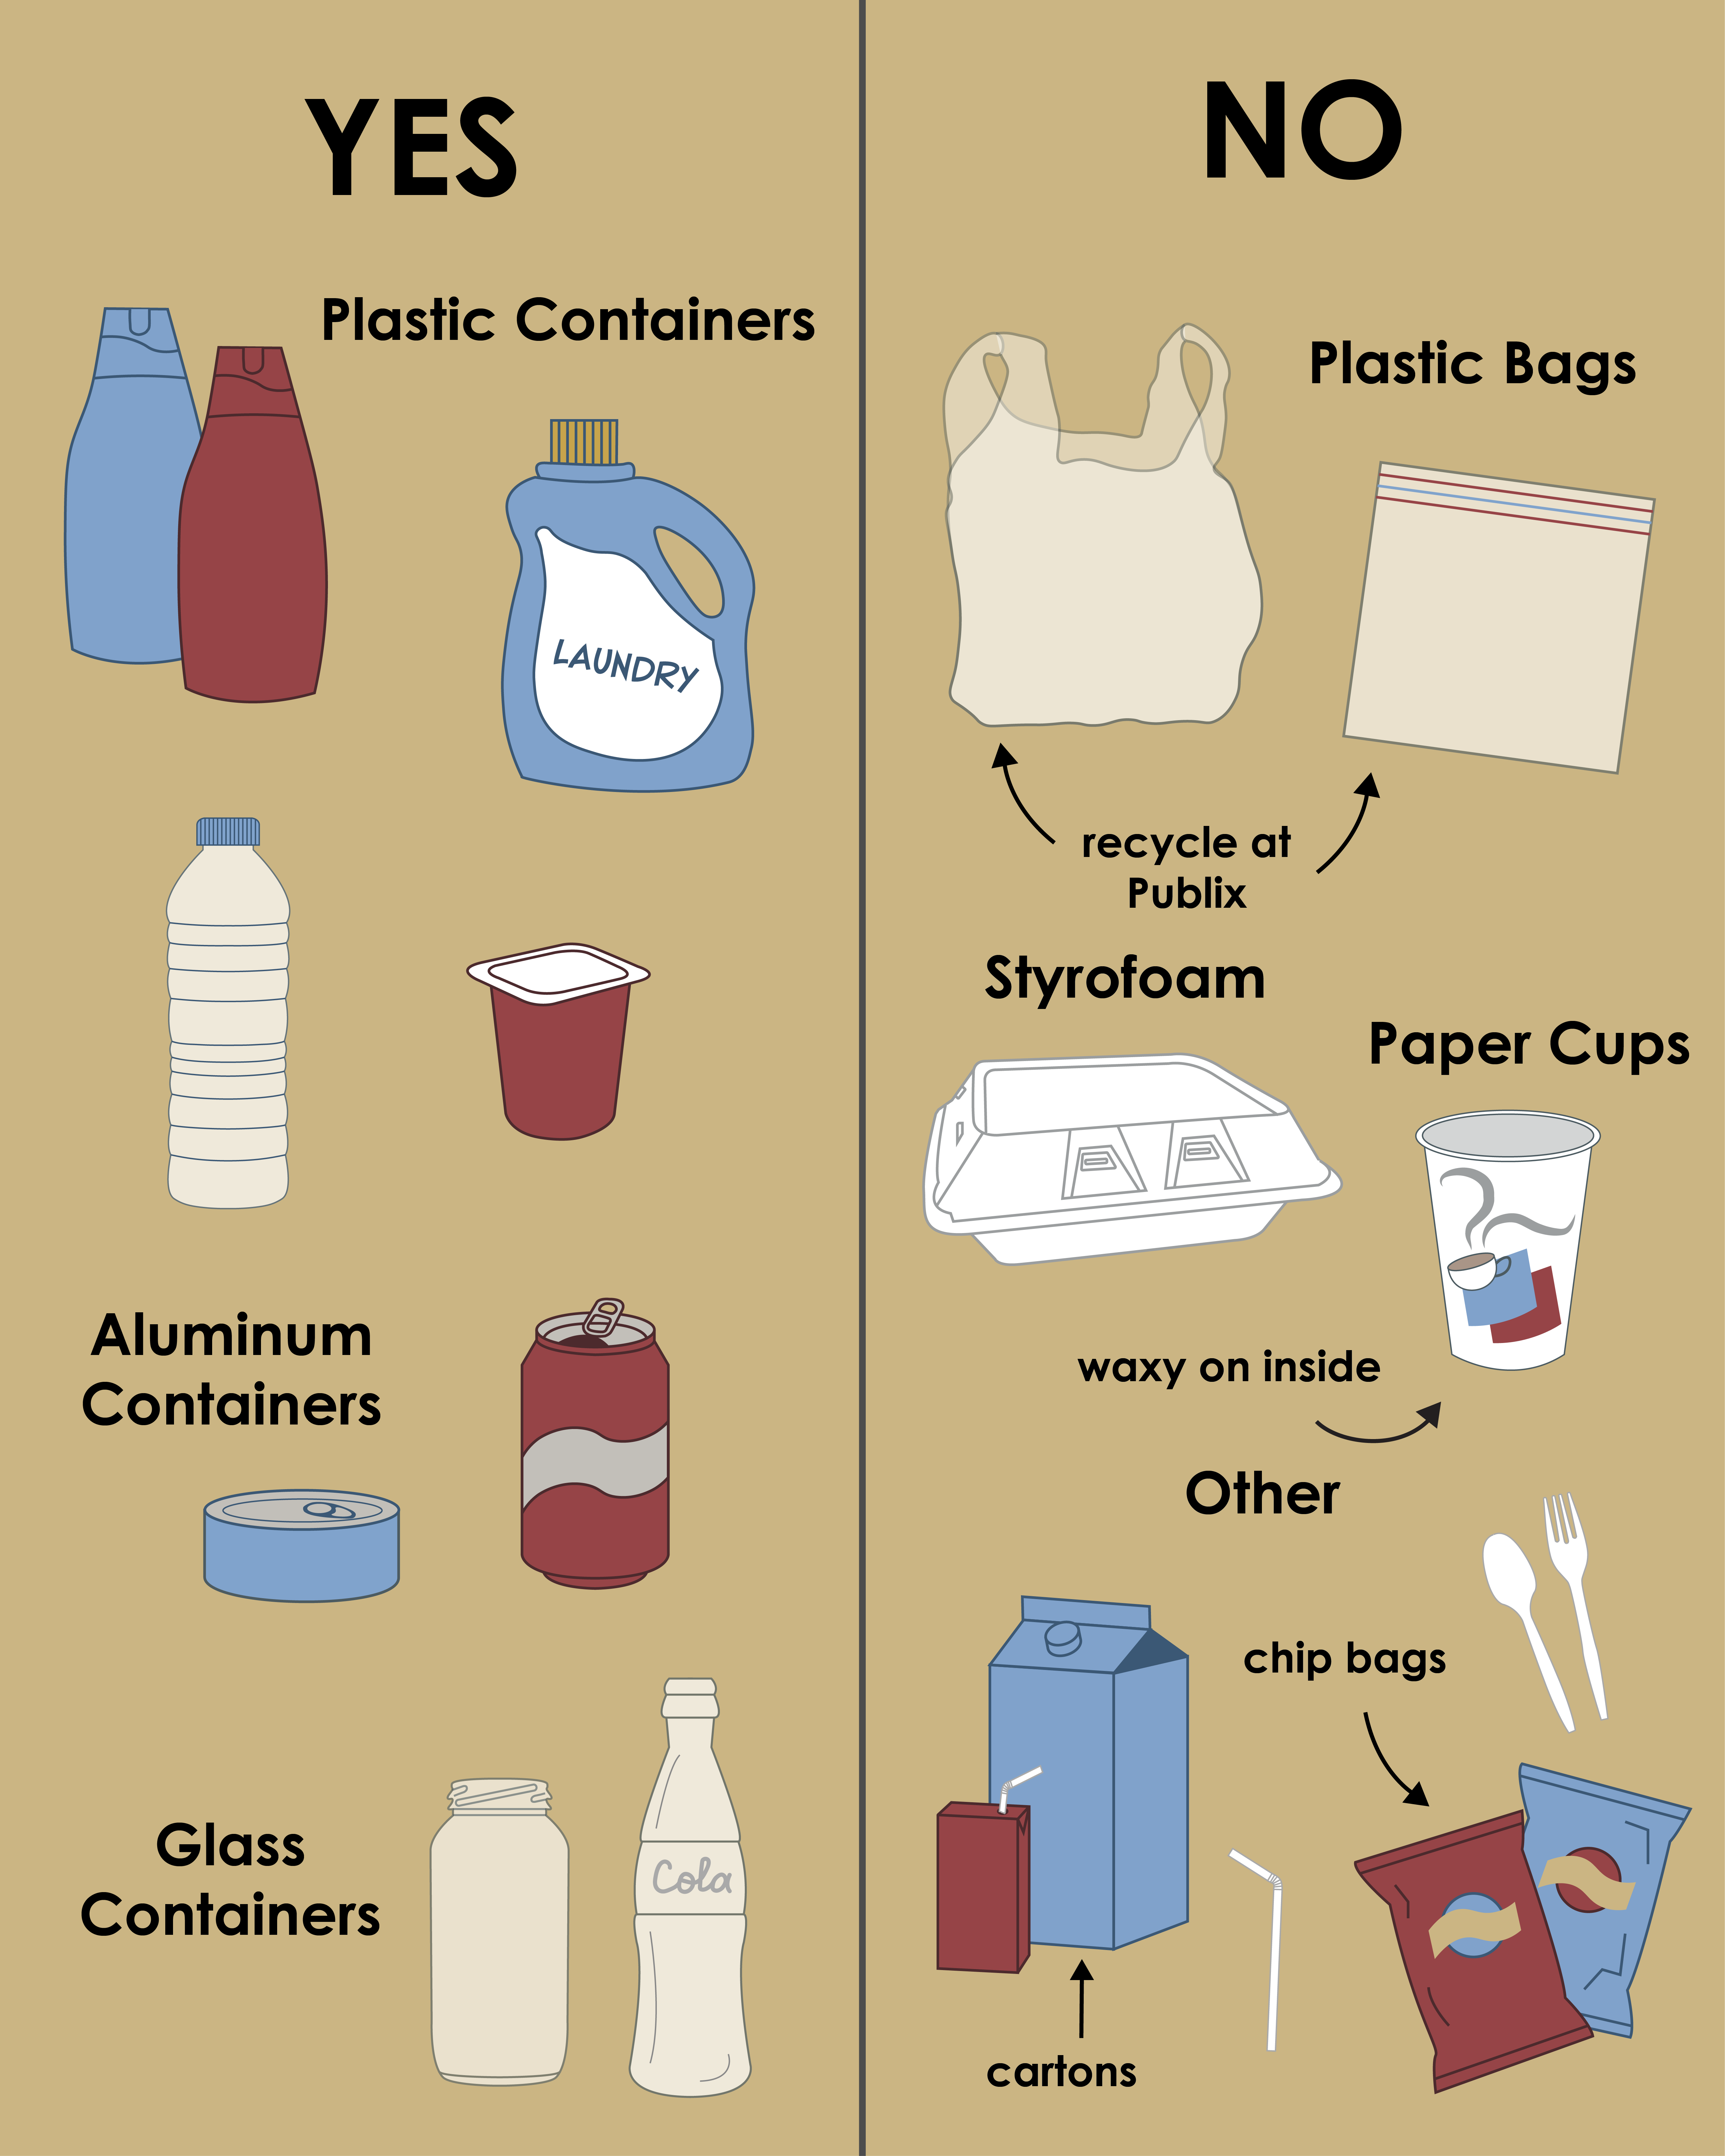 A quick guide to what can and can’t be recycled on campus! Generally, plastic, aluminum, and glass containers can be recycled. Conversely, plastic bags and styrofoam can't be recycled on campus - but may be recycled at an alternate location; paper cups tend to be waxy inside and thus cannot be recycled; and cartons, plastic straws and utensils, and chip bags are also not recyclable on campus.